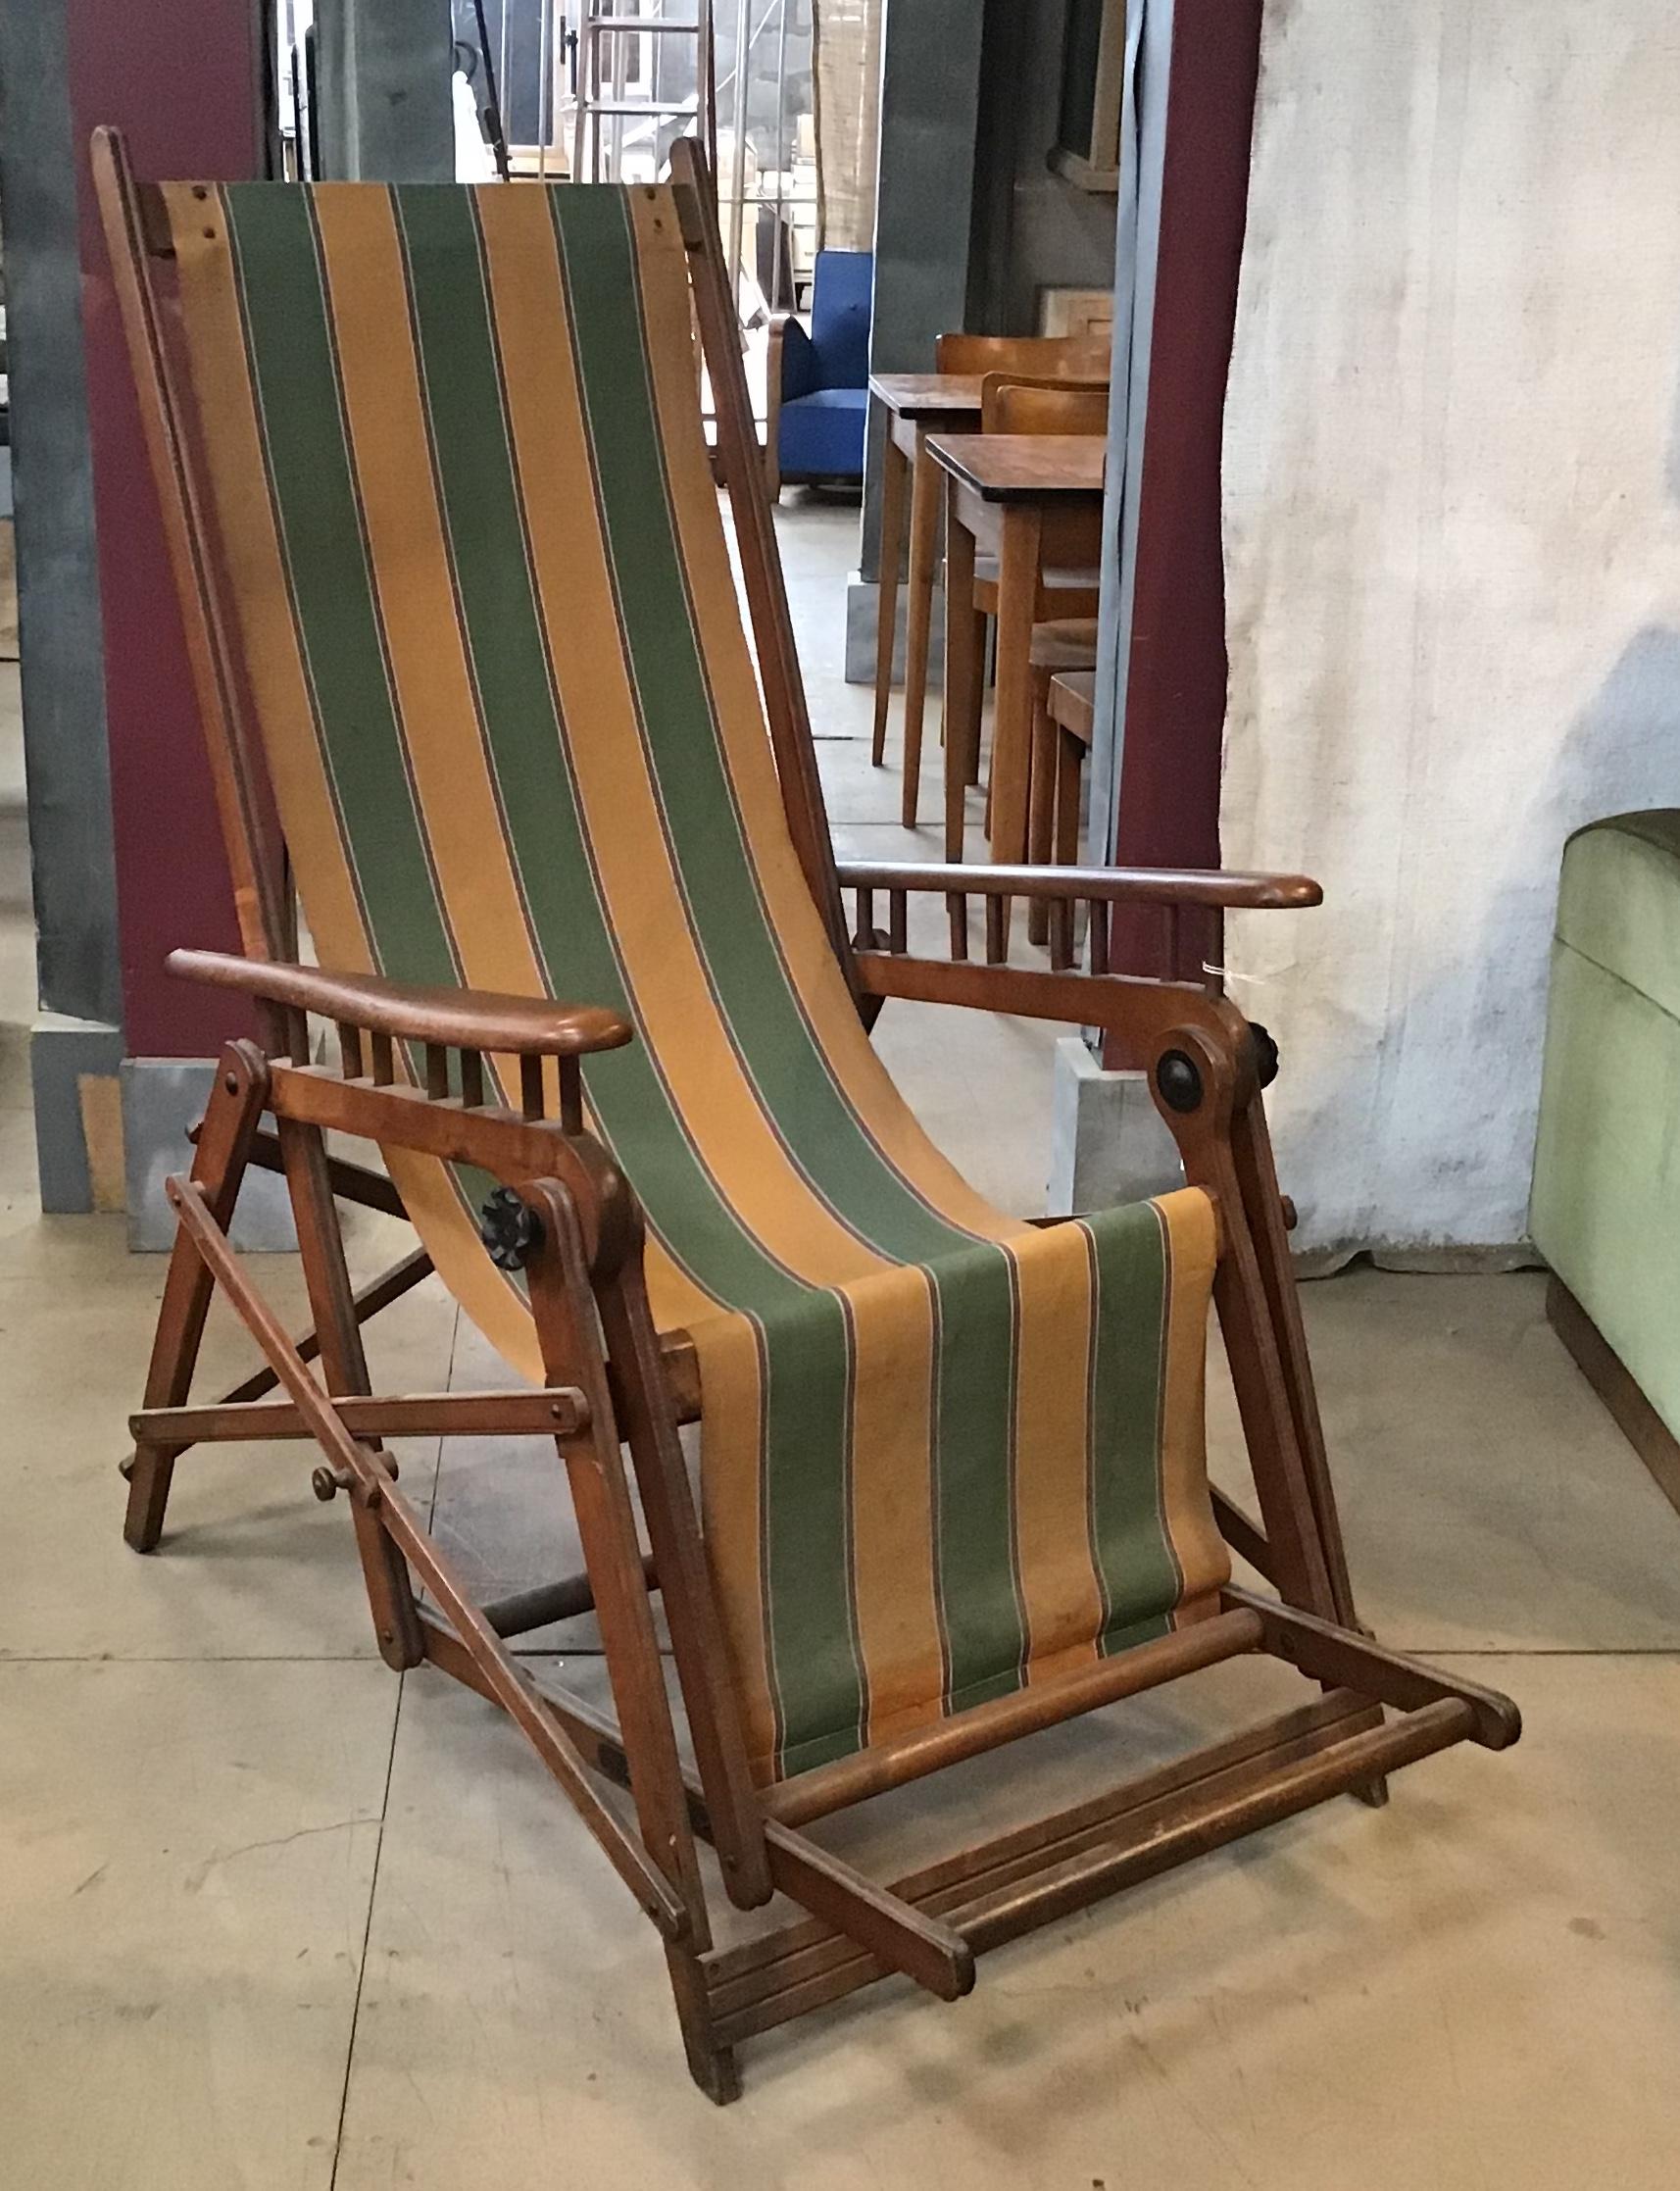 Italian Midcentury Adjustable and Foldable Beach Chair in Walnut from 1960s For Sale 3